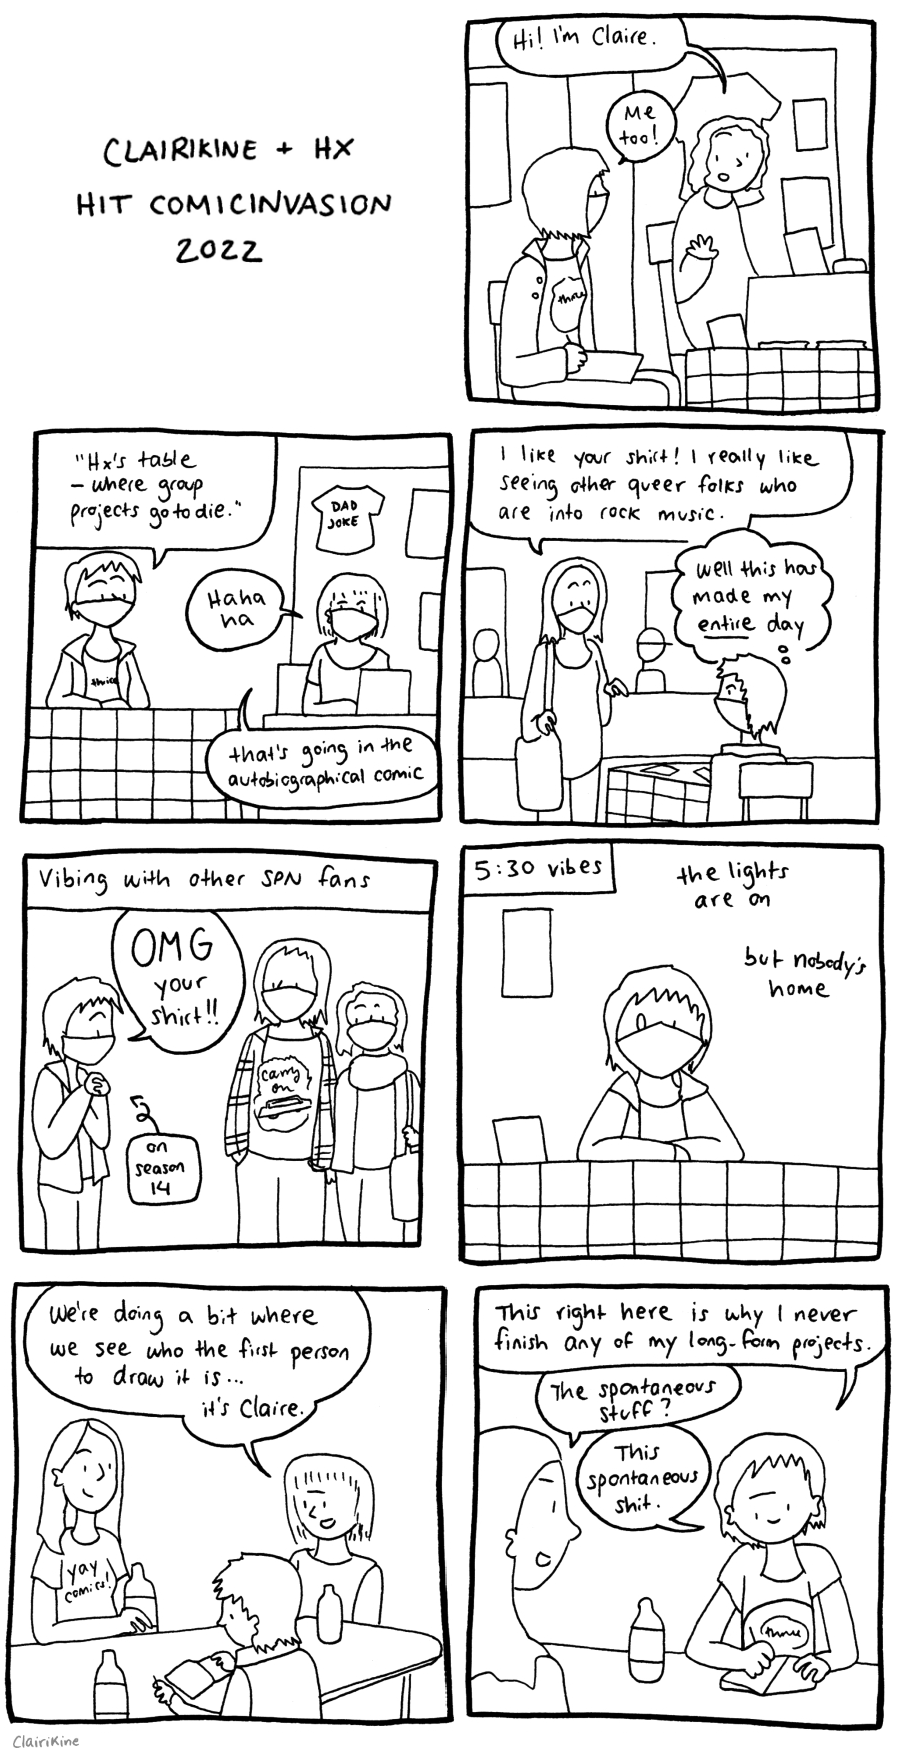 A black-and-white comic titled "Clairikine + HX do Comic Invasion 2022". In the first panel, Claire is sitting at their table at Comicinvasion wearing a jeans jacket and a shirt that says "Thrice". Someone next to them says "Hi! I'm Claire" and Claire responds "Me too!" In the second panel, Claire and HX are sitting next to each other at their tables. Claire says " 'HX' table - where group projects go to die' and HX says "Ha ha ha. That's going in the autobiographical comic" In the third panel, a visitor tells Claire "I like your shirt! I really like seeing other queer folks who are into rock music." Claire thinks "Well this has made my entire day." The fourth panel has the caption "Vibing with other SPN fans". Claire is standing next to two people, one of which is wearing a shirt with the words "Carry On" against a ring of fire and above a Chevy Impala. Claire is clasping her hands and saying "OMG your shirt!!", with a caption pointing at her saying "on season 14". The fifth panel has the caption "5:30 vibes" and the text "the lights are on, but nobody's home". It shows Claire sitting at their table with eyes of two different sizes, staring into the void. The sixth panel shows Lara (wearing a "Yay Comics!" shirt), HX and Claire sitting around a table with drinks. HX says "We're doing a bit where we see who the first person to draw it is... it's Claire". Claire is looking at a blank sketchbook page with a pen in her hand. The seventh panel shows Claire drawing into the sketchbook while frowning and saying "This right here is why I never finish any of my long-form projects." Lara asks "The spontaneous stuff?" and Claire says "This spontaneous shit."